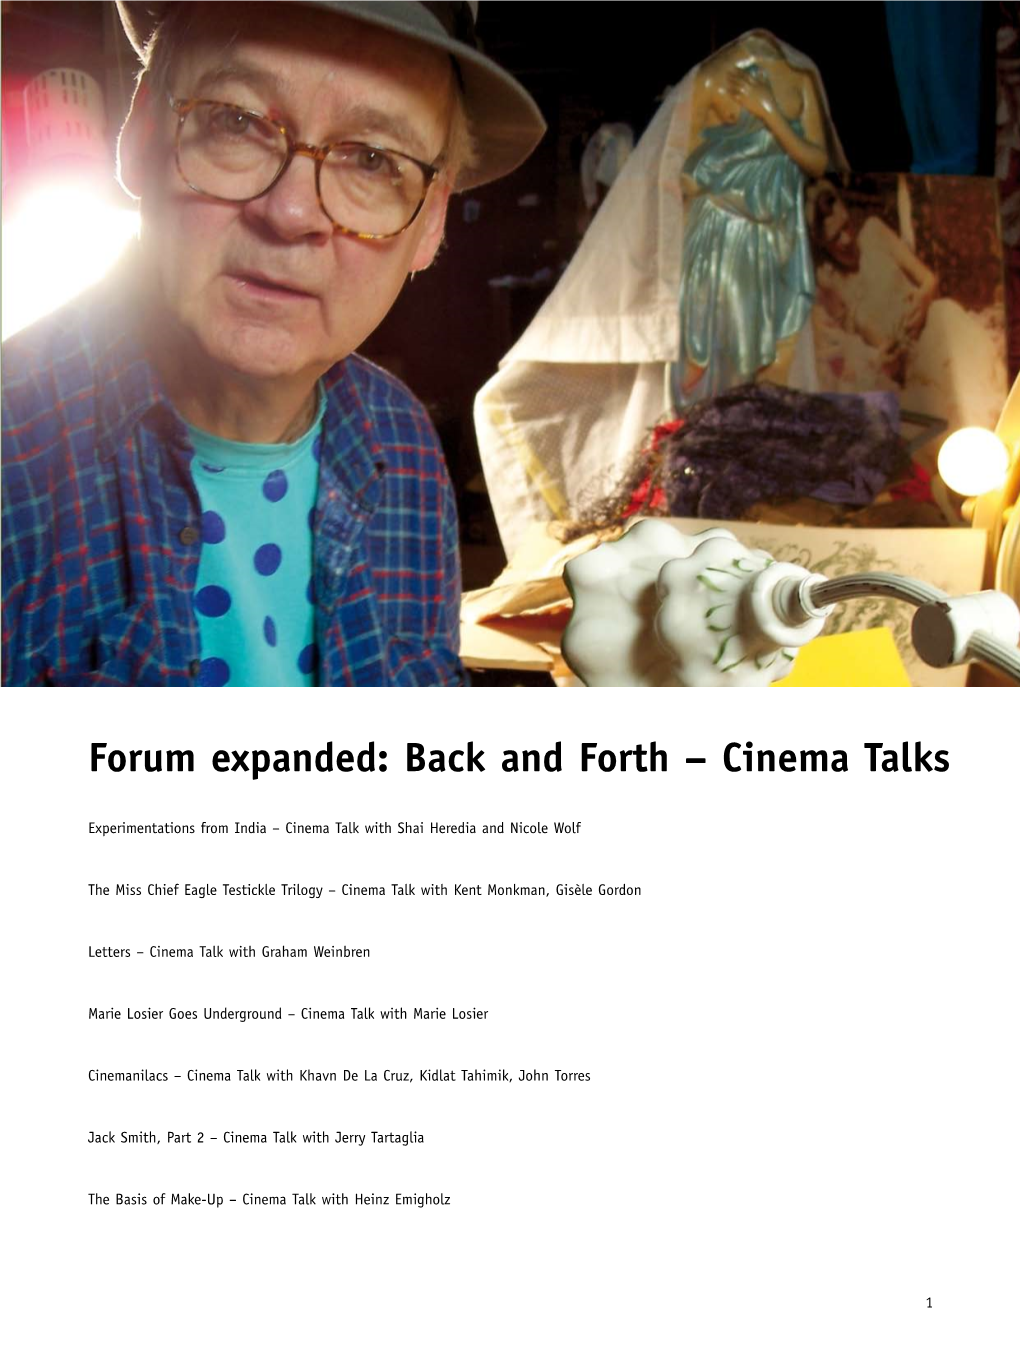 Forum Expanded: Back and Forth – Cinema Talks